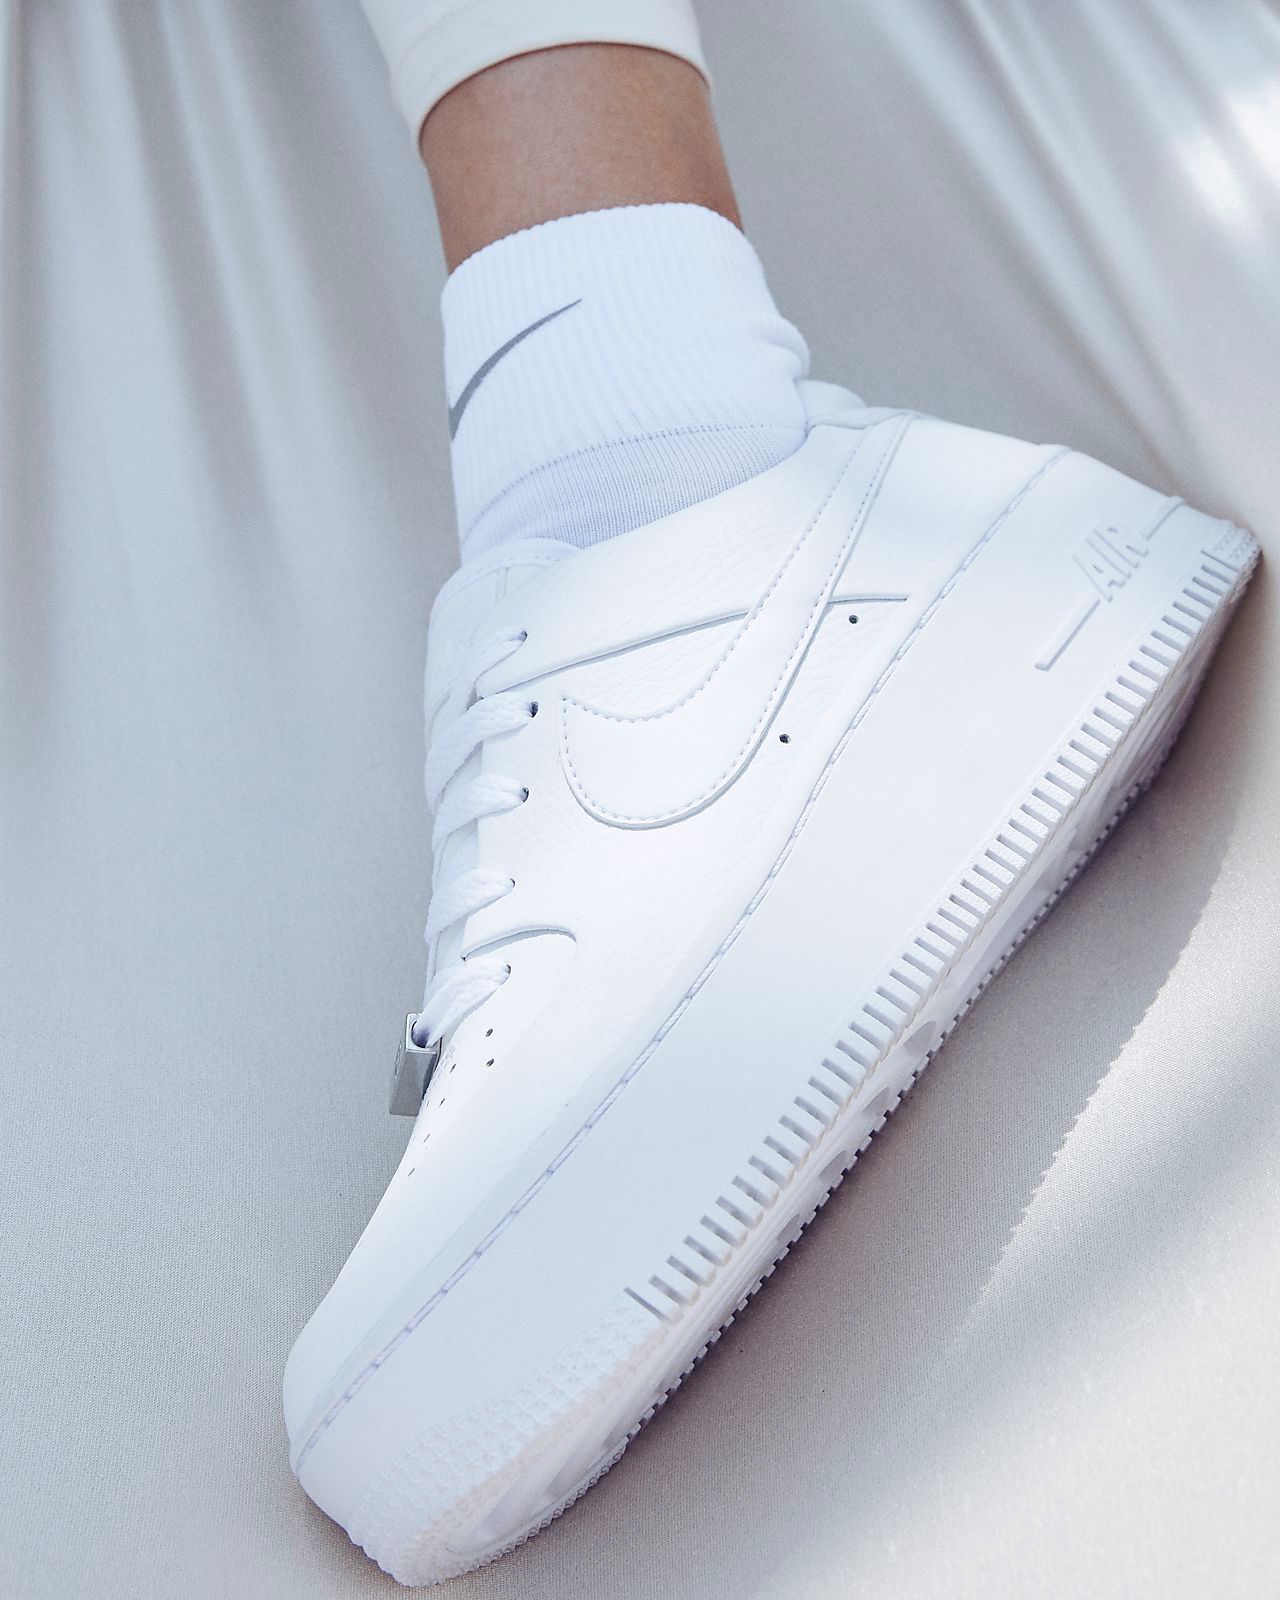 nike air force 1 indossate